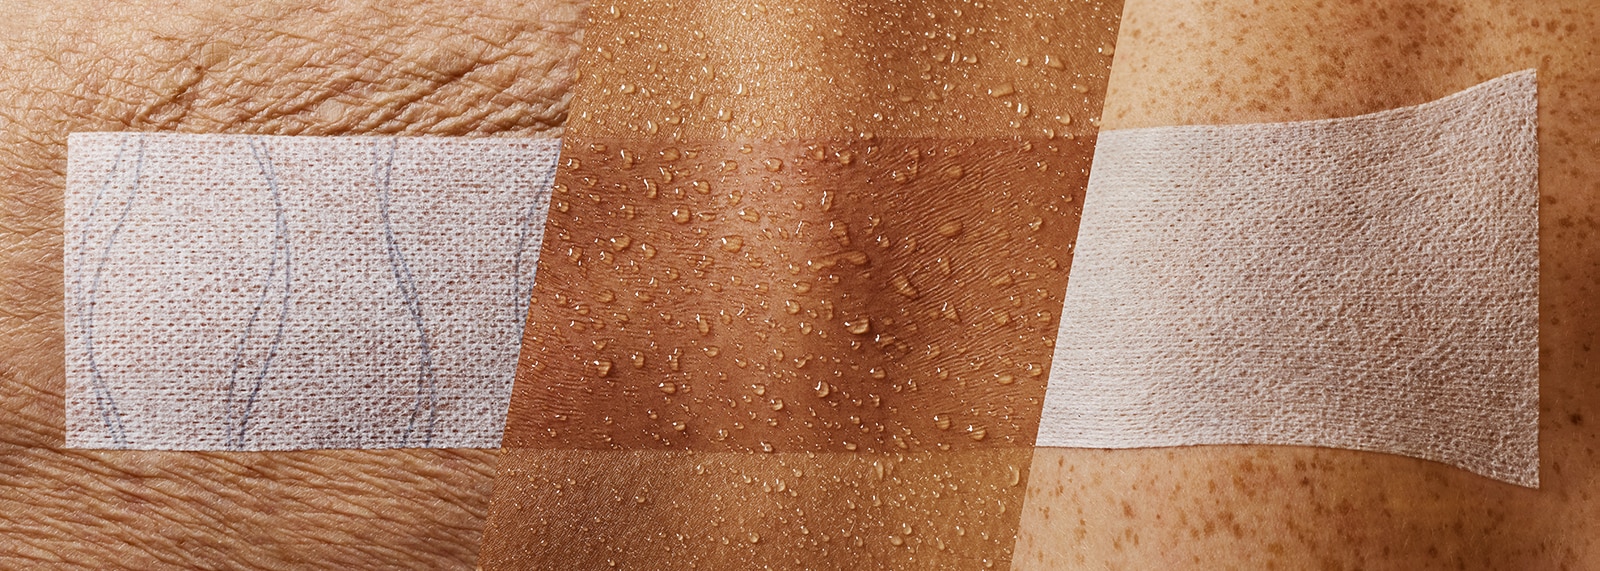 Close-up of 3 fixation dressings applied on 3 different skin types (dressing on elderly and wrinkled skin, transparent dressing on wet skin and stretched dressing on a joint